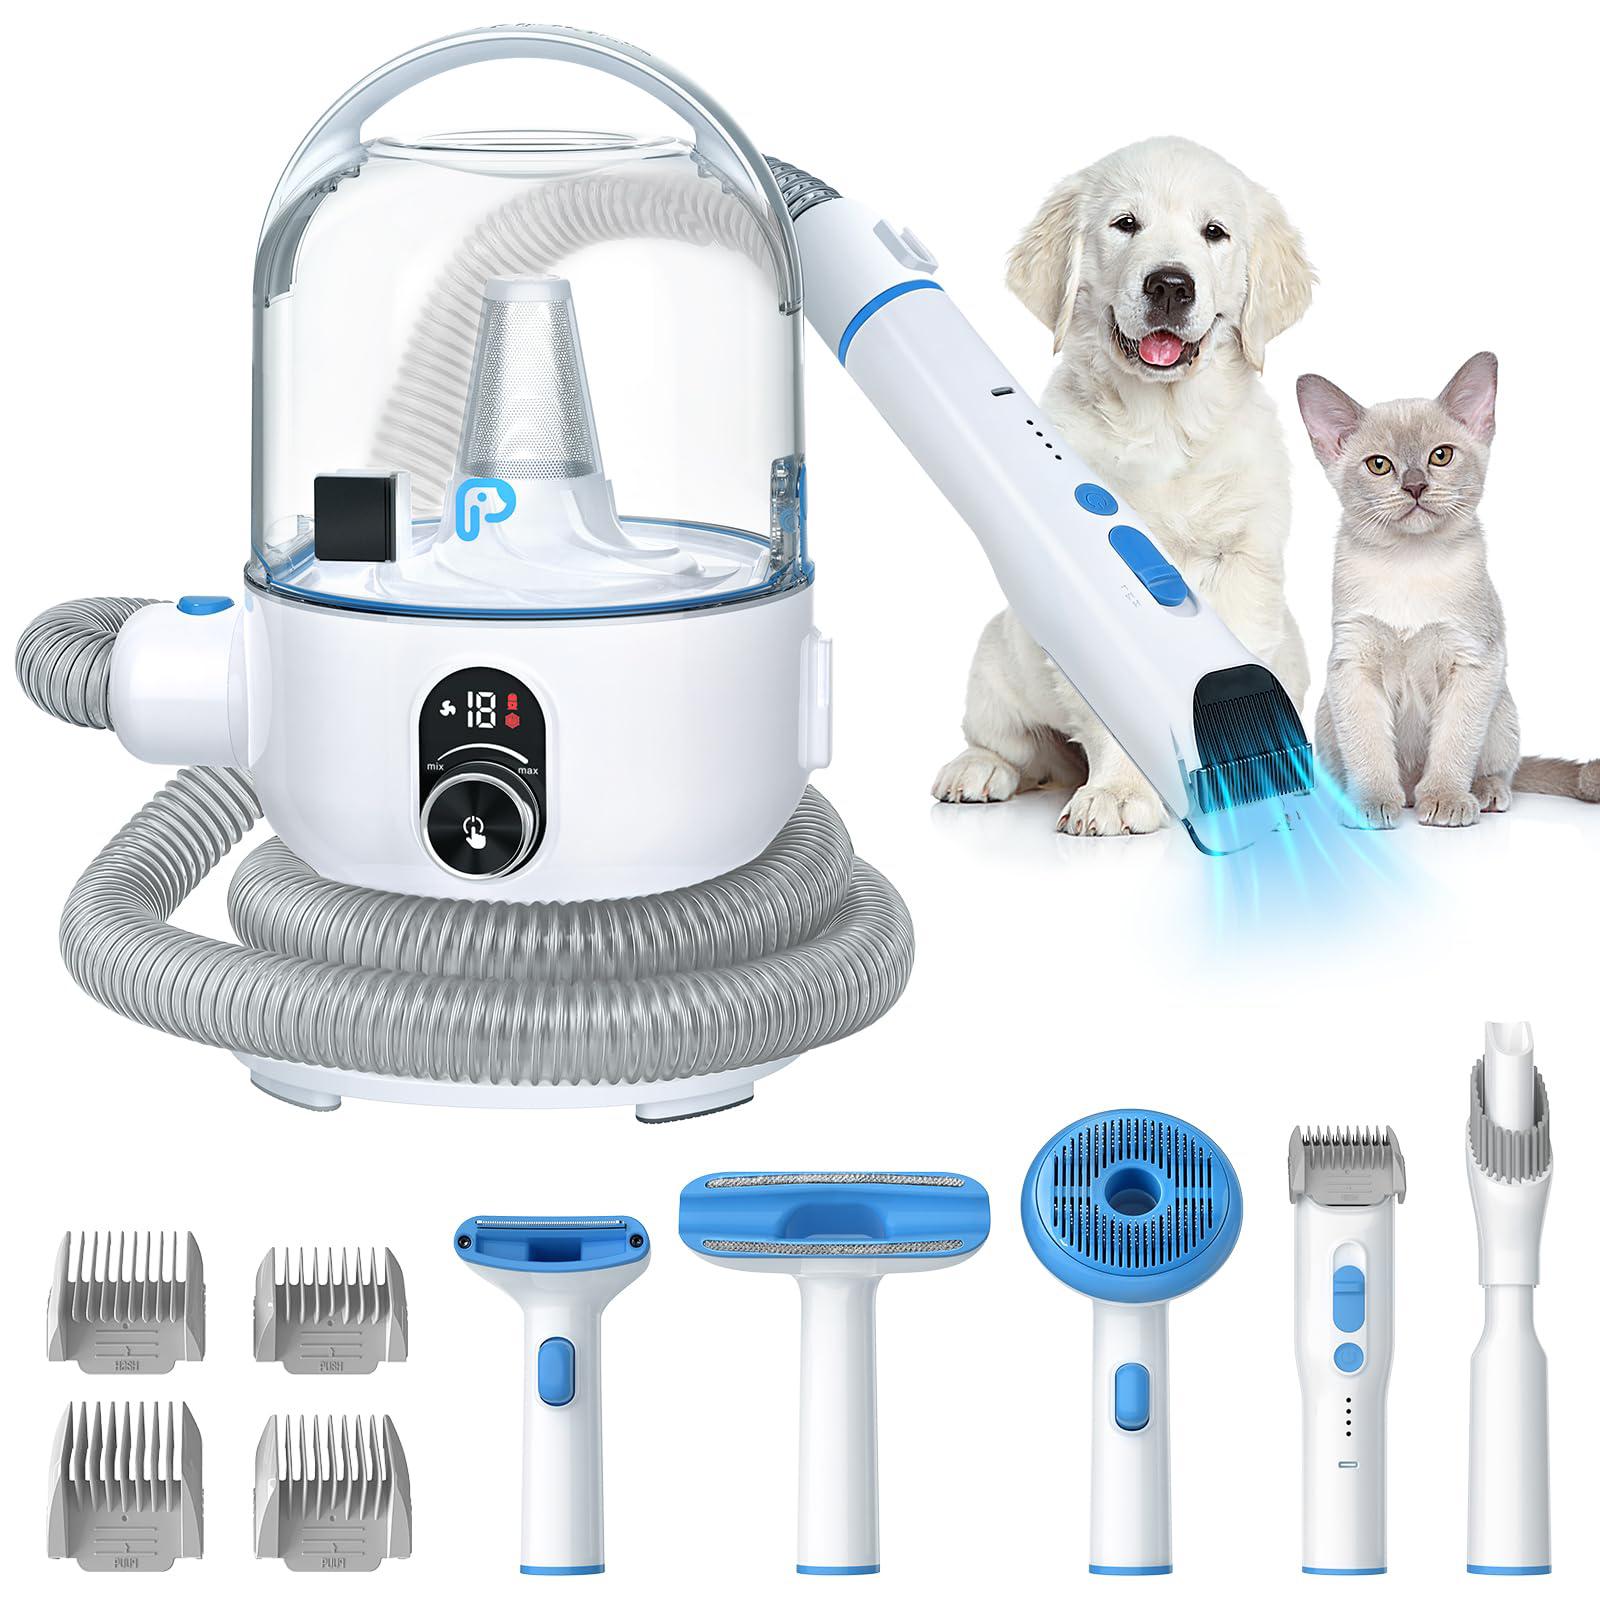 euker dog grooming kit - low noise vacuum suction, 99.99% hair removal, and 5 professional grooming tools, 16-level variable 